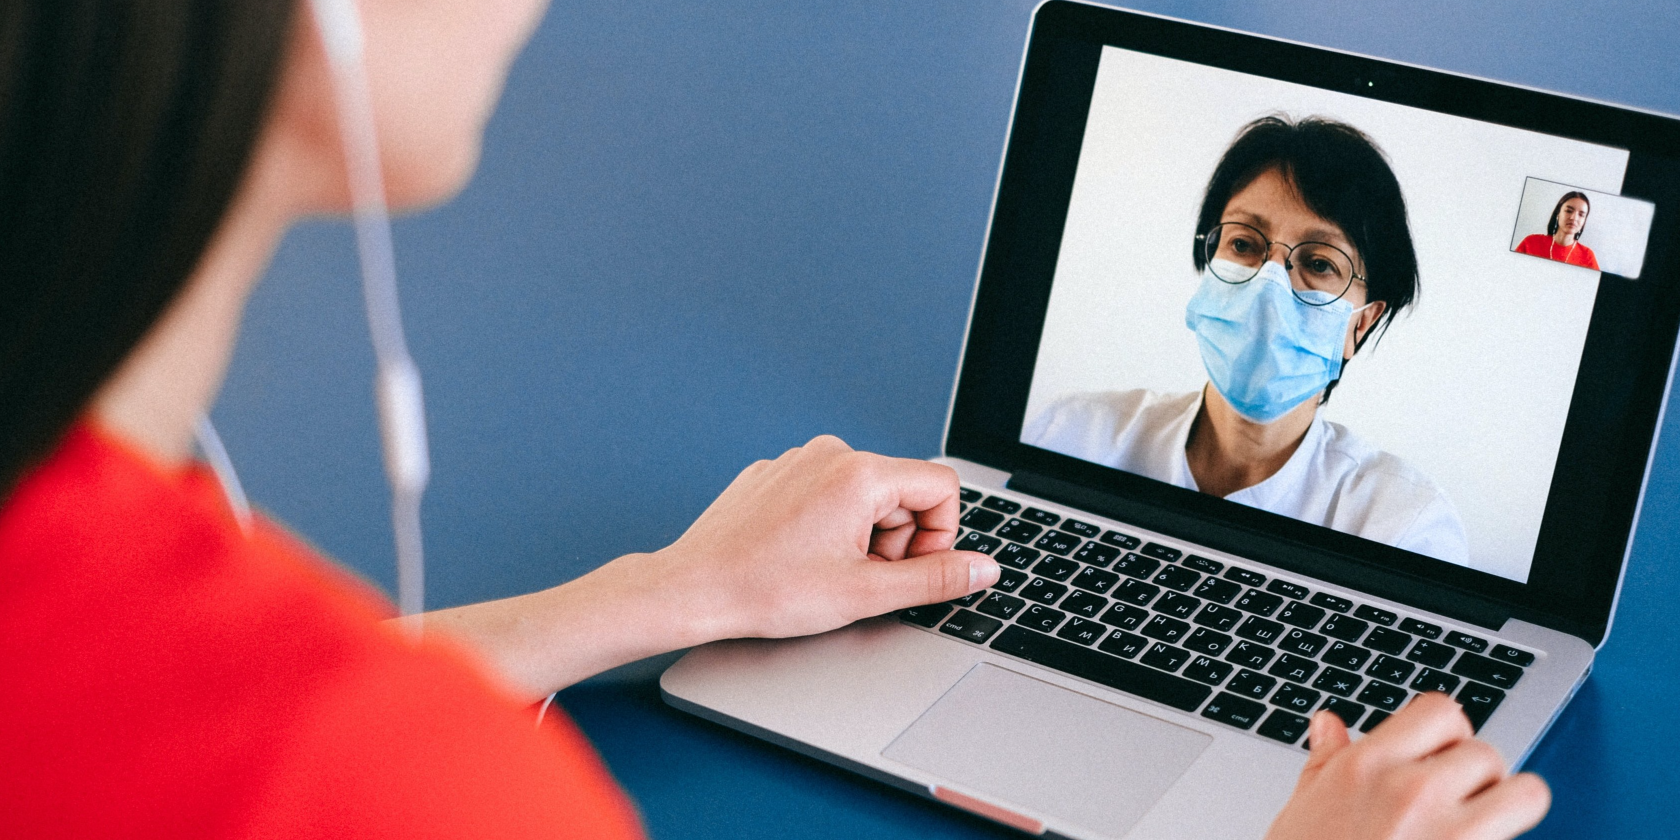 Woman looking at a doctor wearing a mask on a computer video call